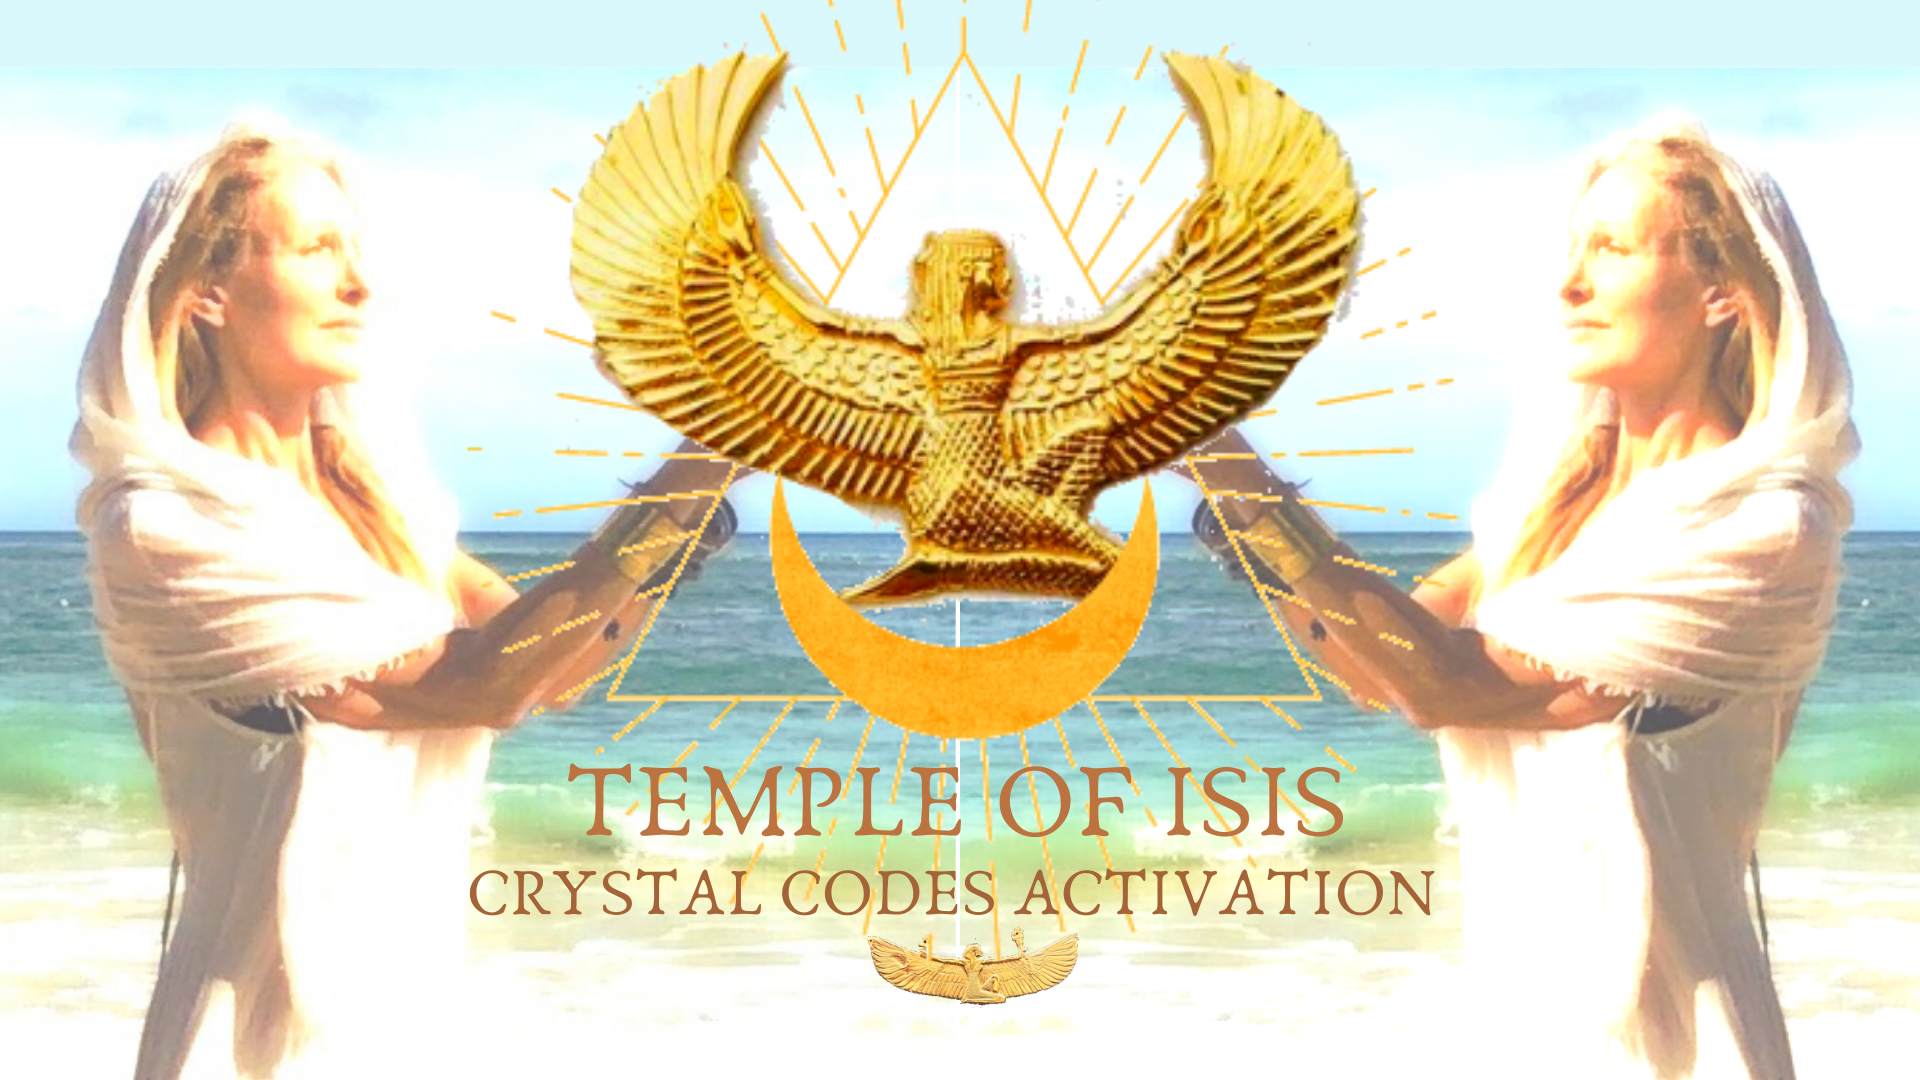 TEMPLE OF ISIS CRYSTAL GOLD CODES ACTIVATION - Live from Bali 